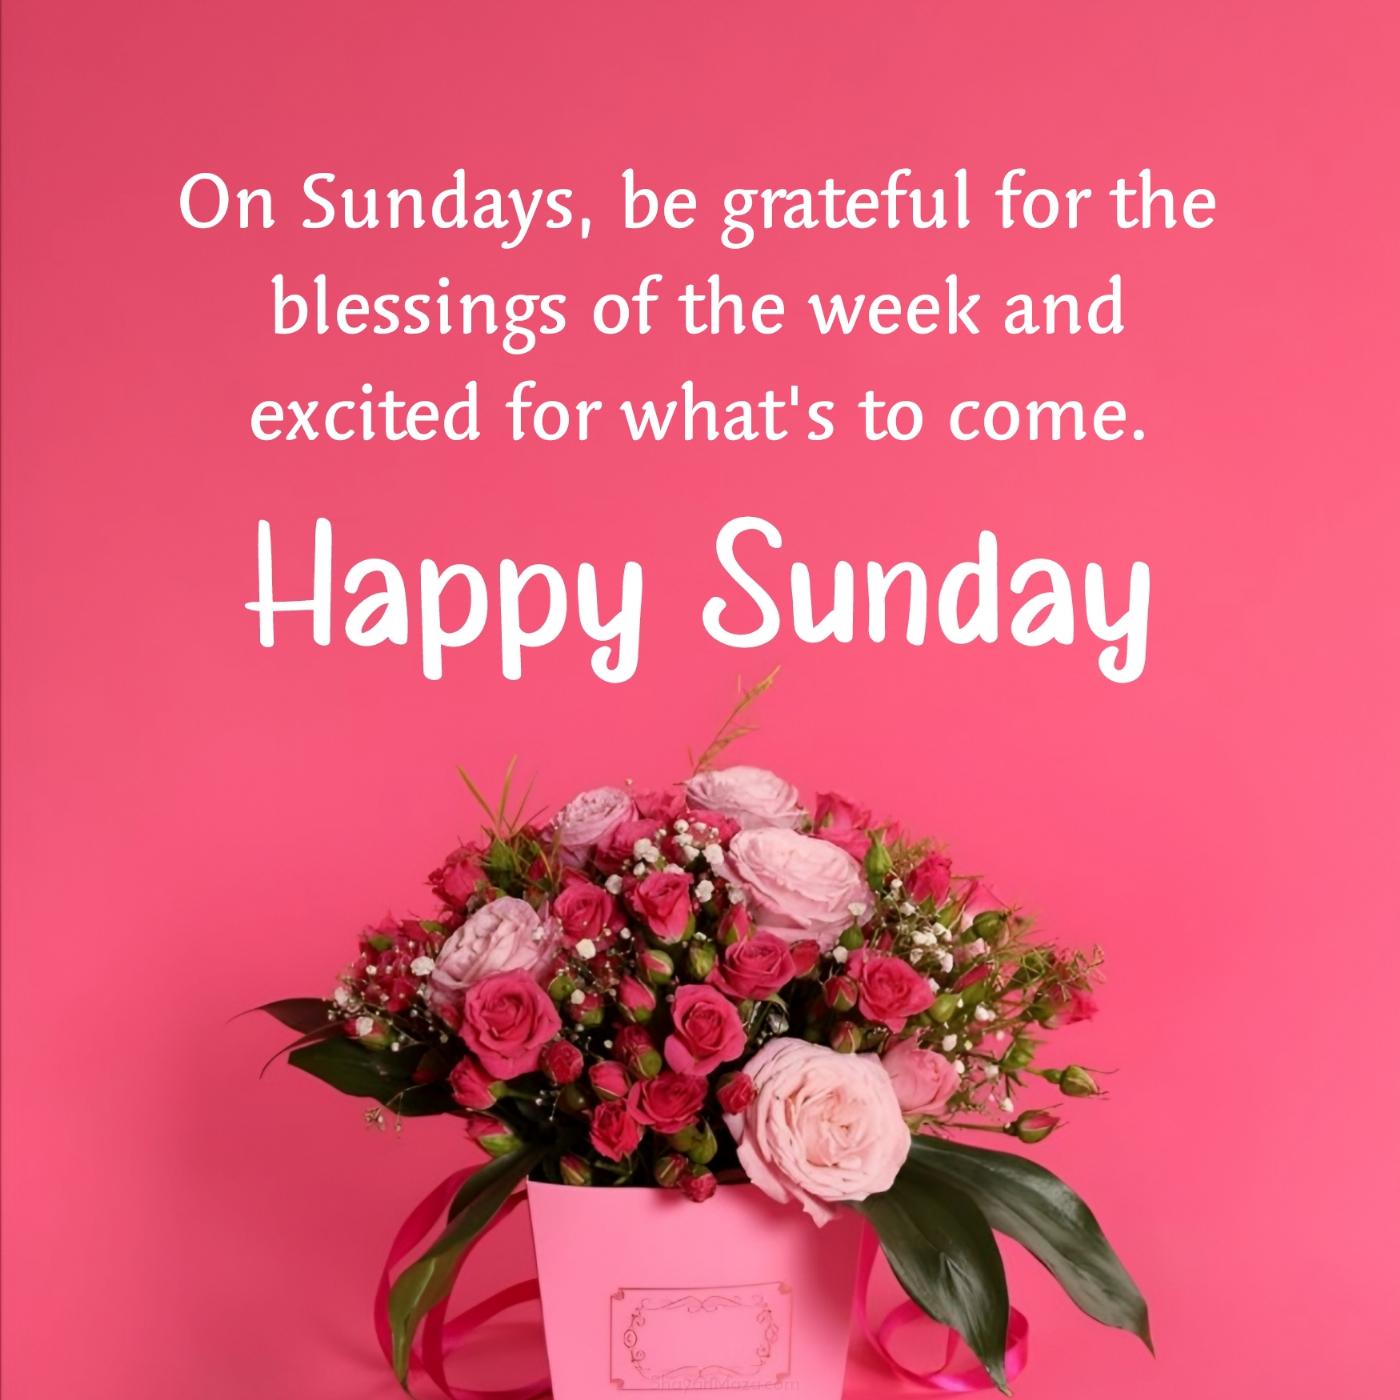 On Sundays be grateful for the blessings of the week